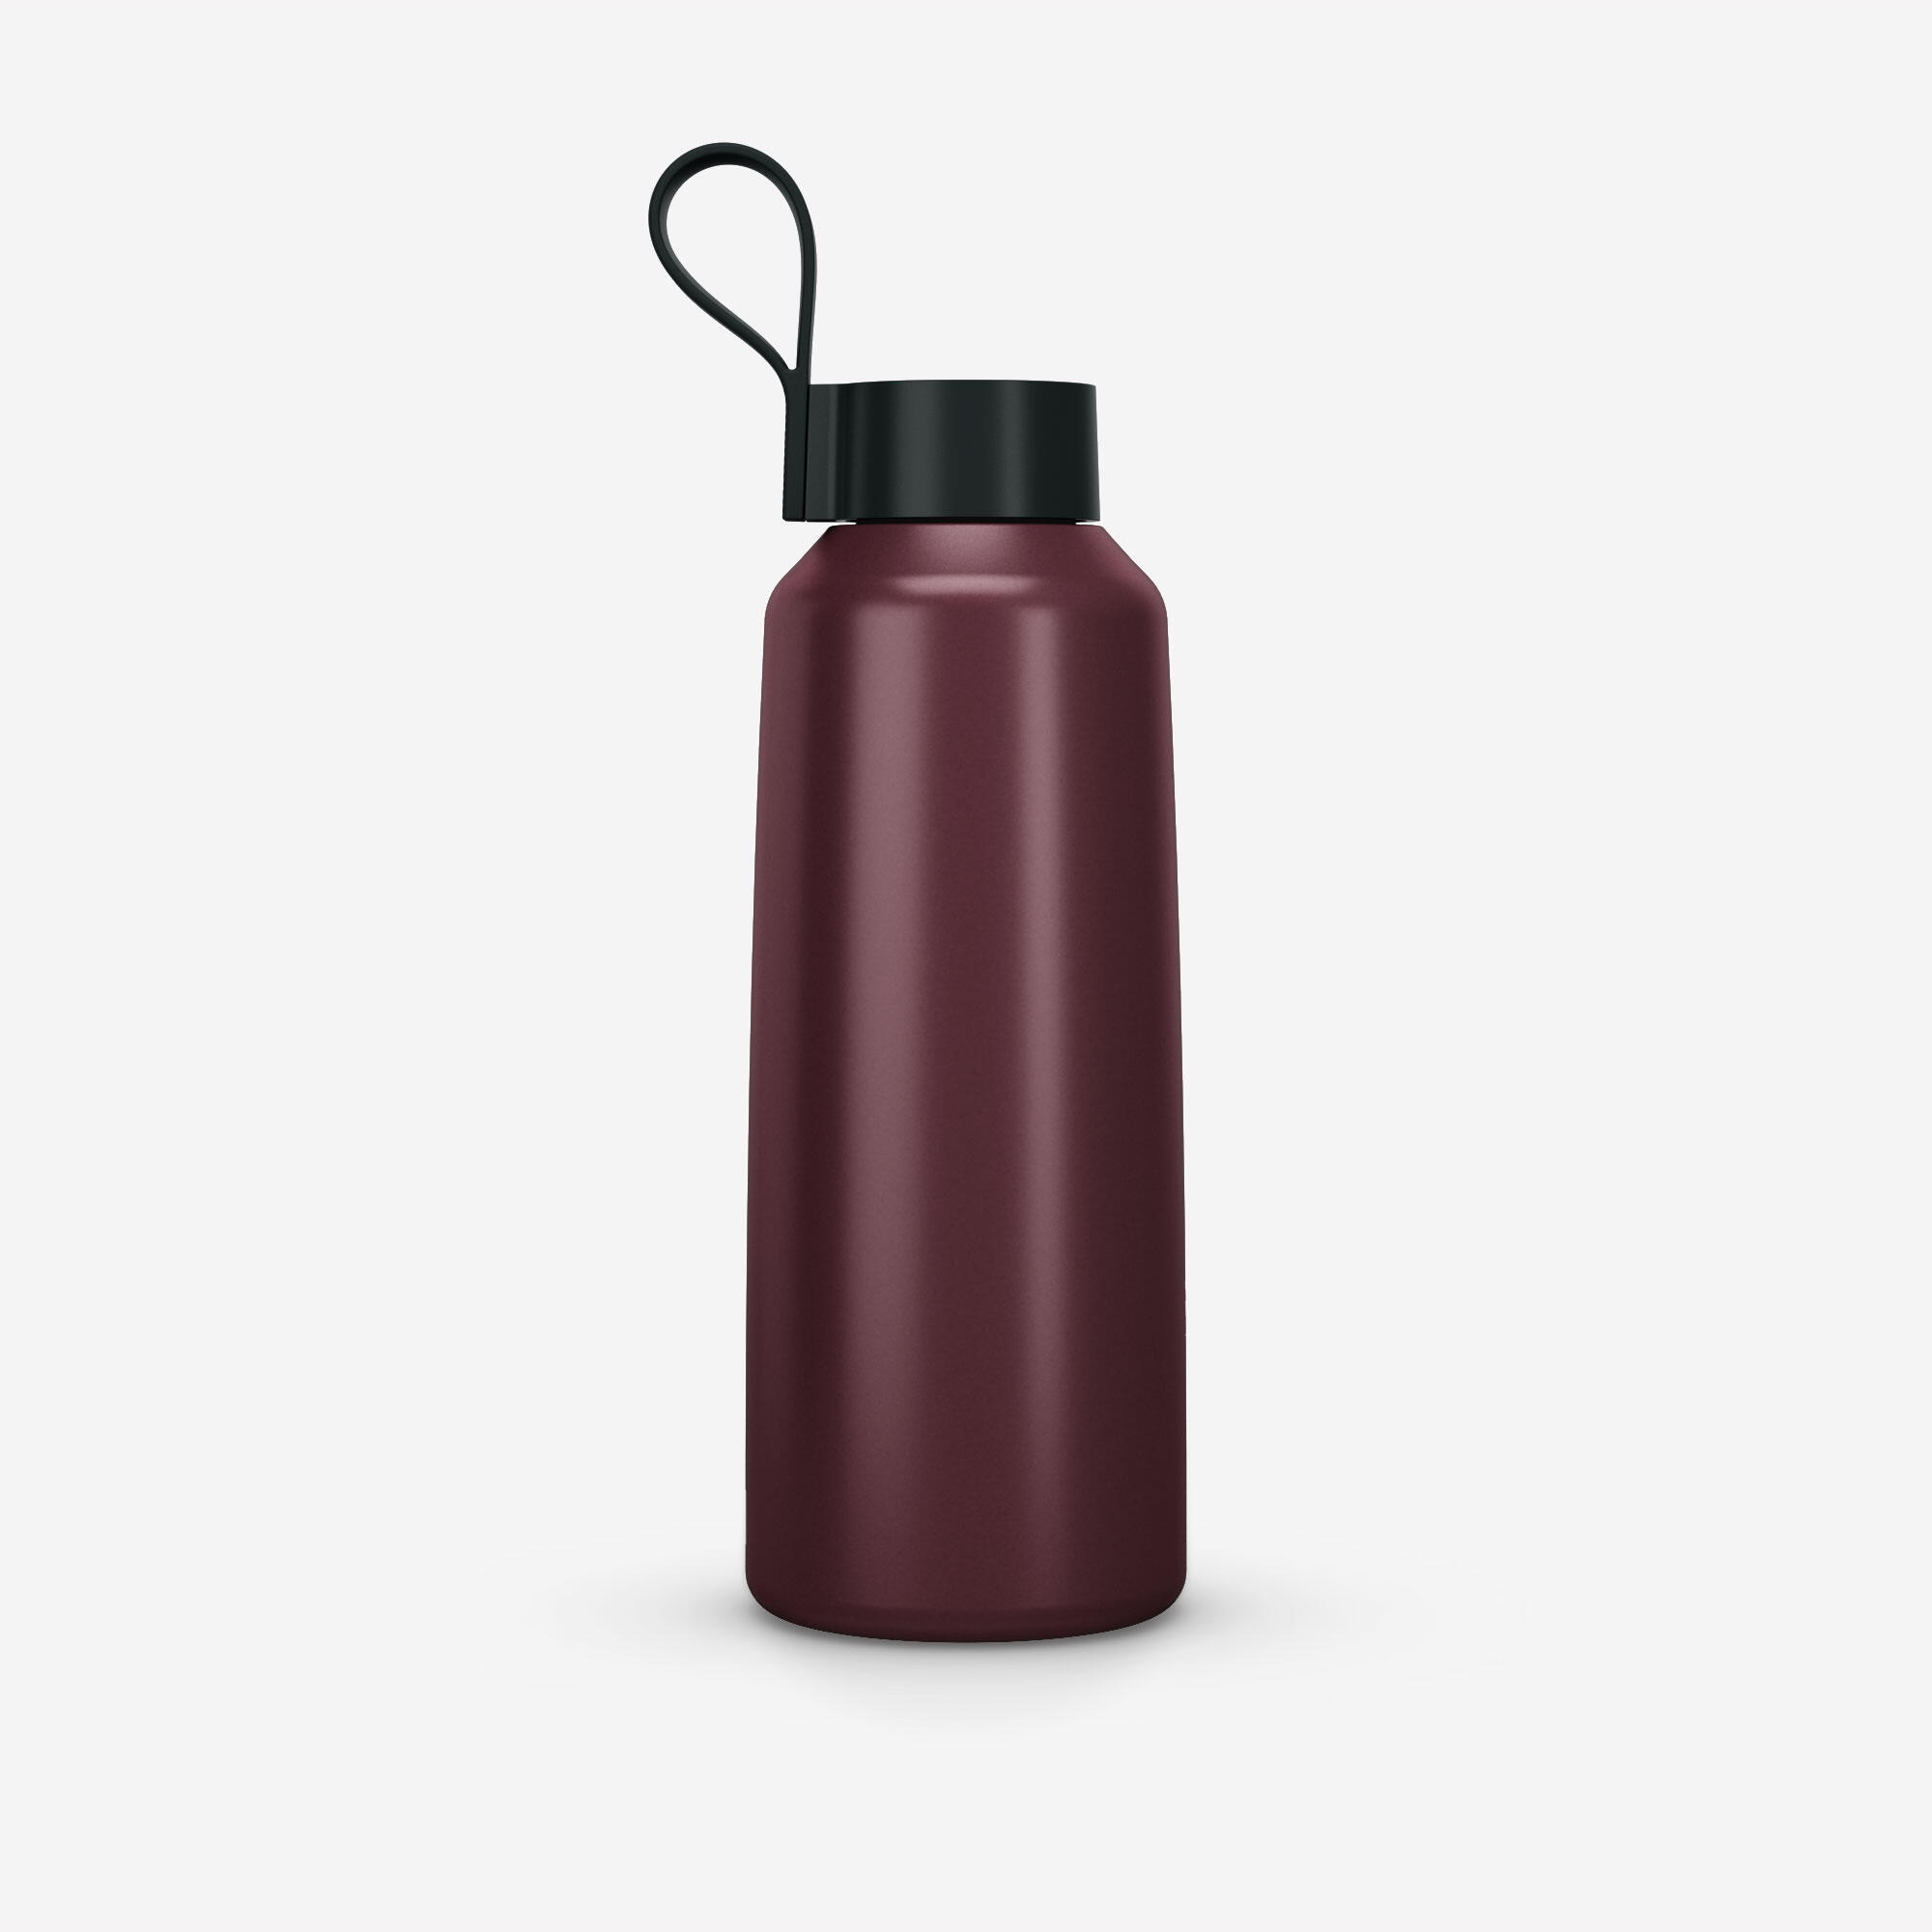 1 L stainless steel water bottle with screw cap for hiking 2/10